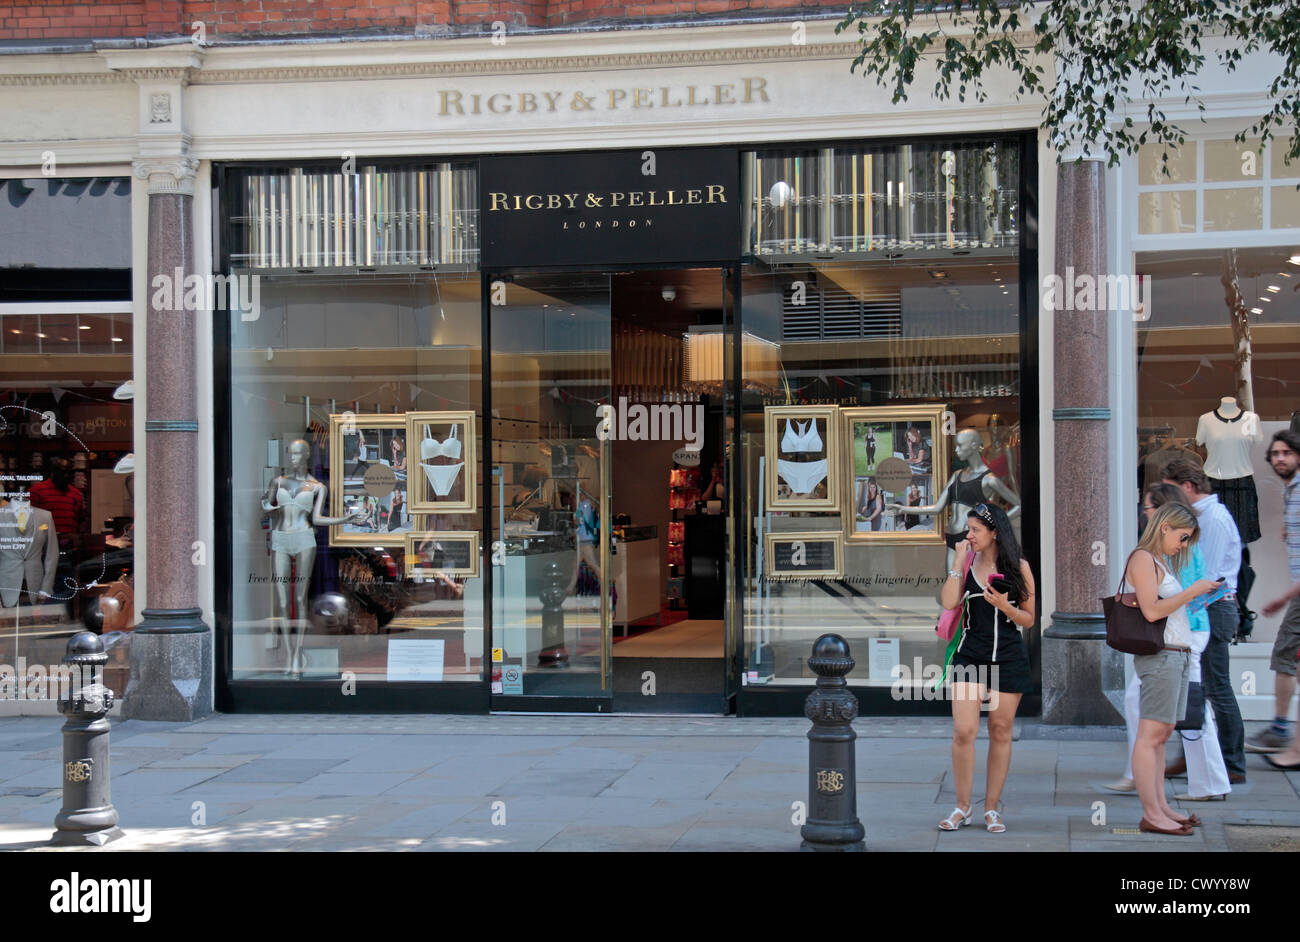 The Rigby & Peller lingerie store on the King's Road, Chelsea